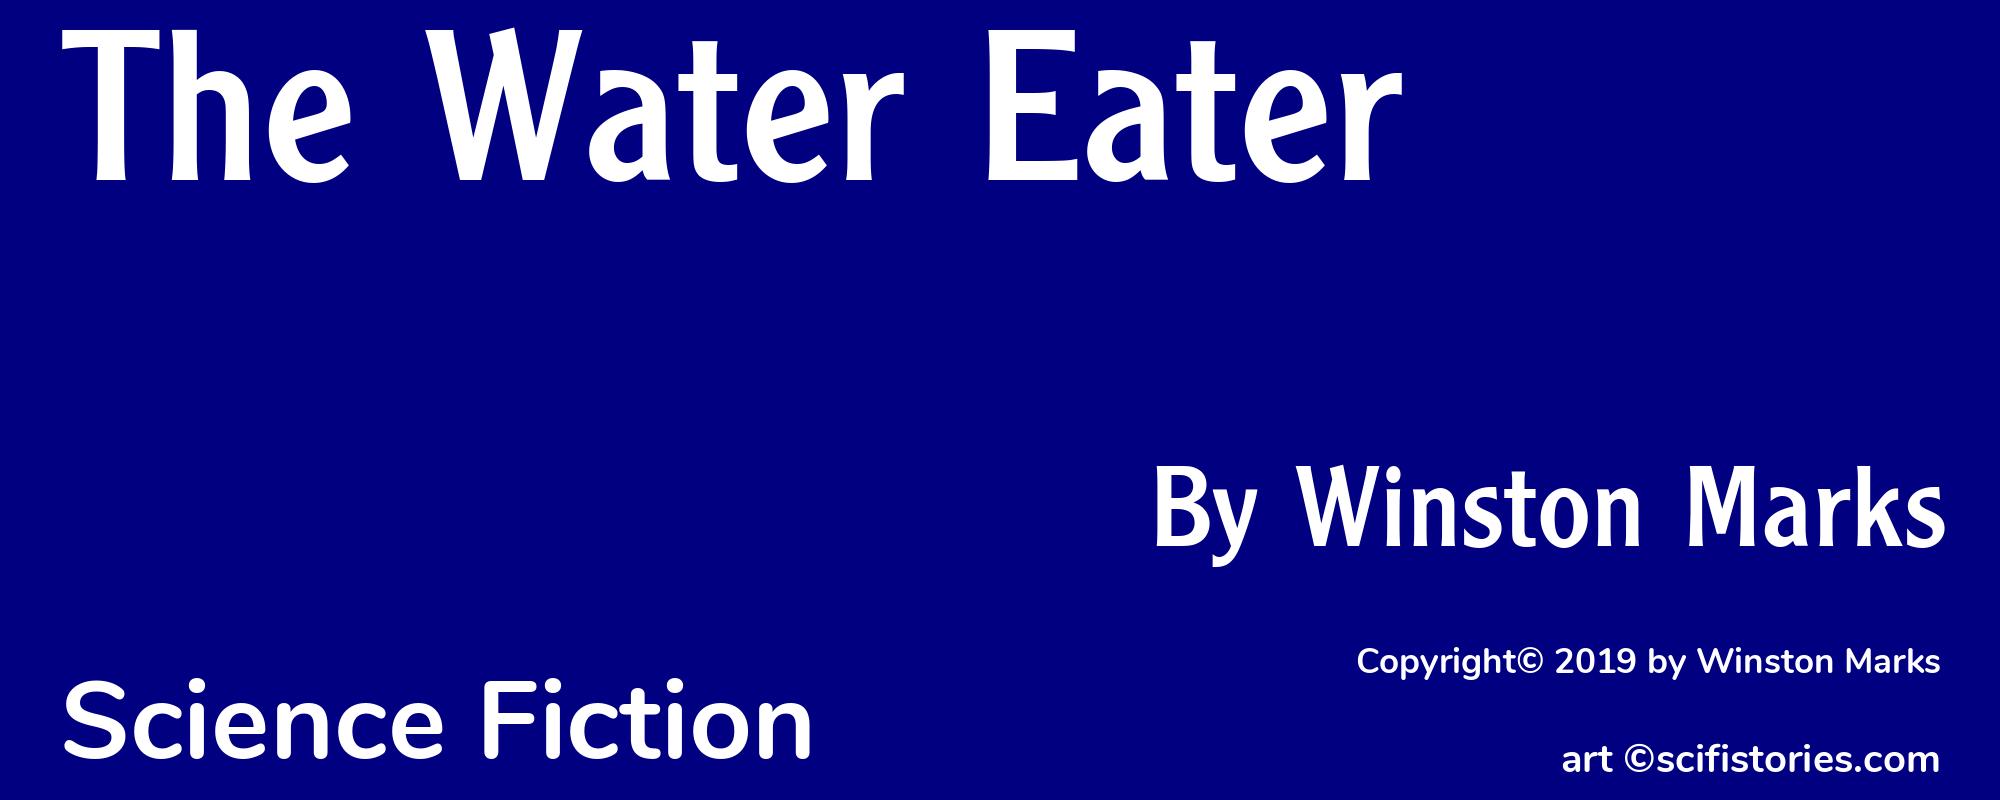 The Water Eater - Cover